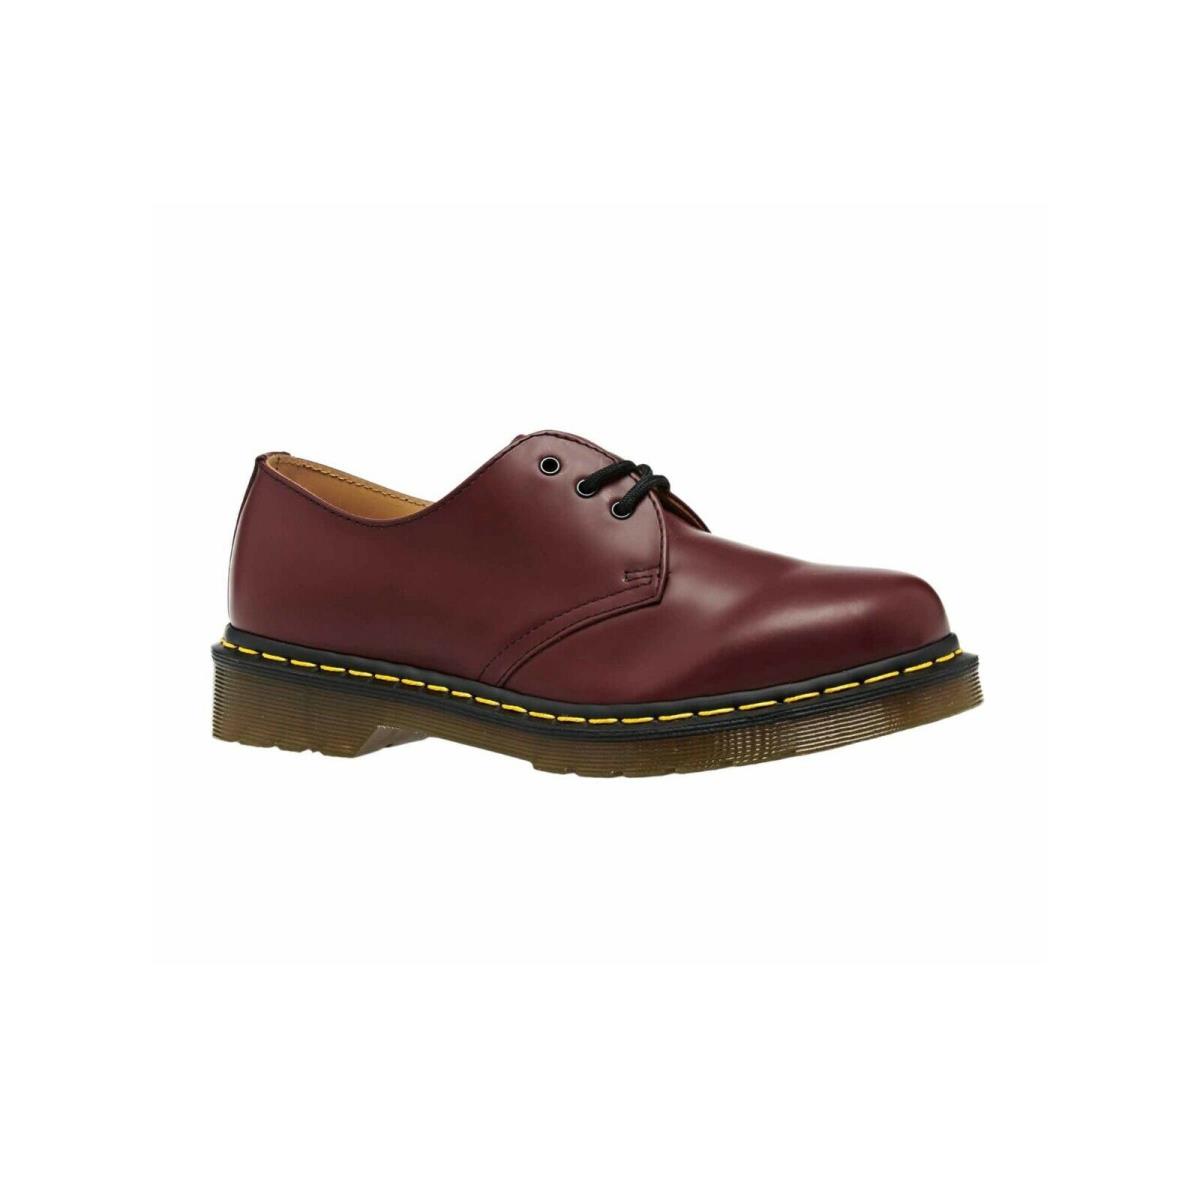 Dr Martens 1461 Cherry Red Smooth Leather Classic Men Women Platform Shoes - Red